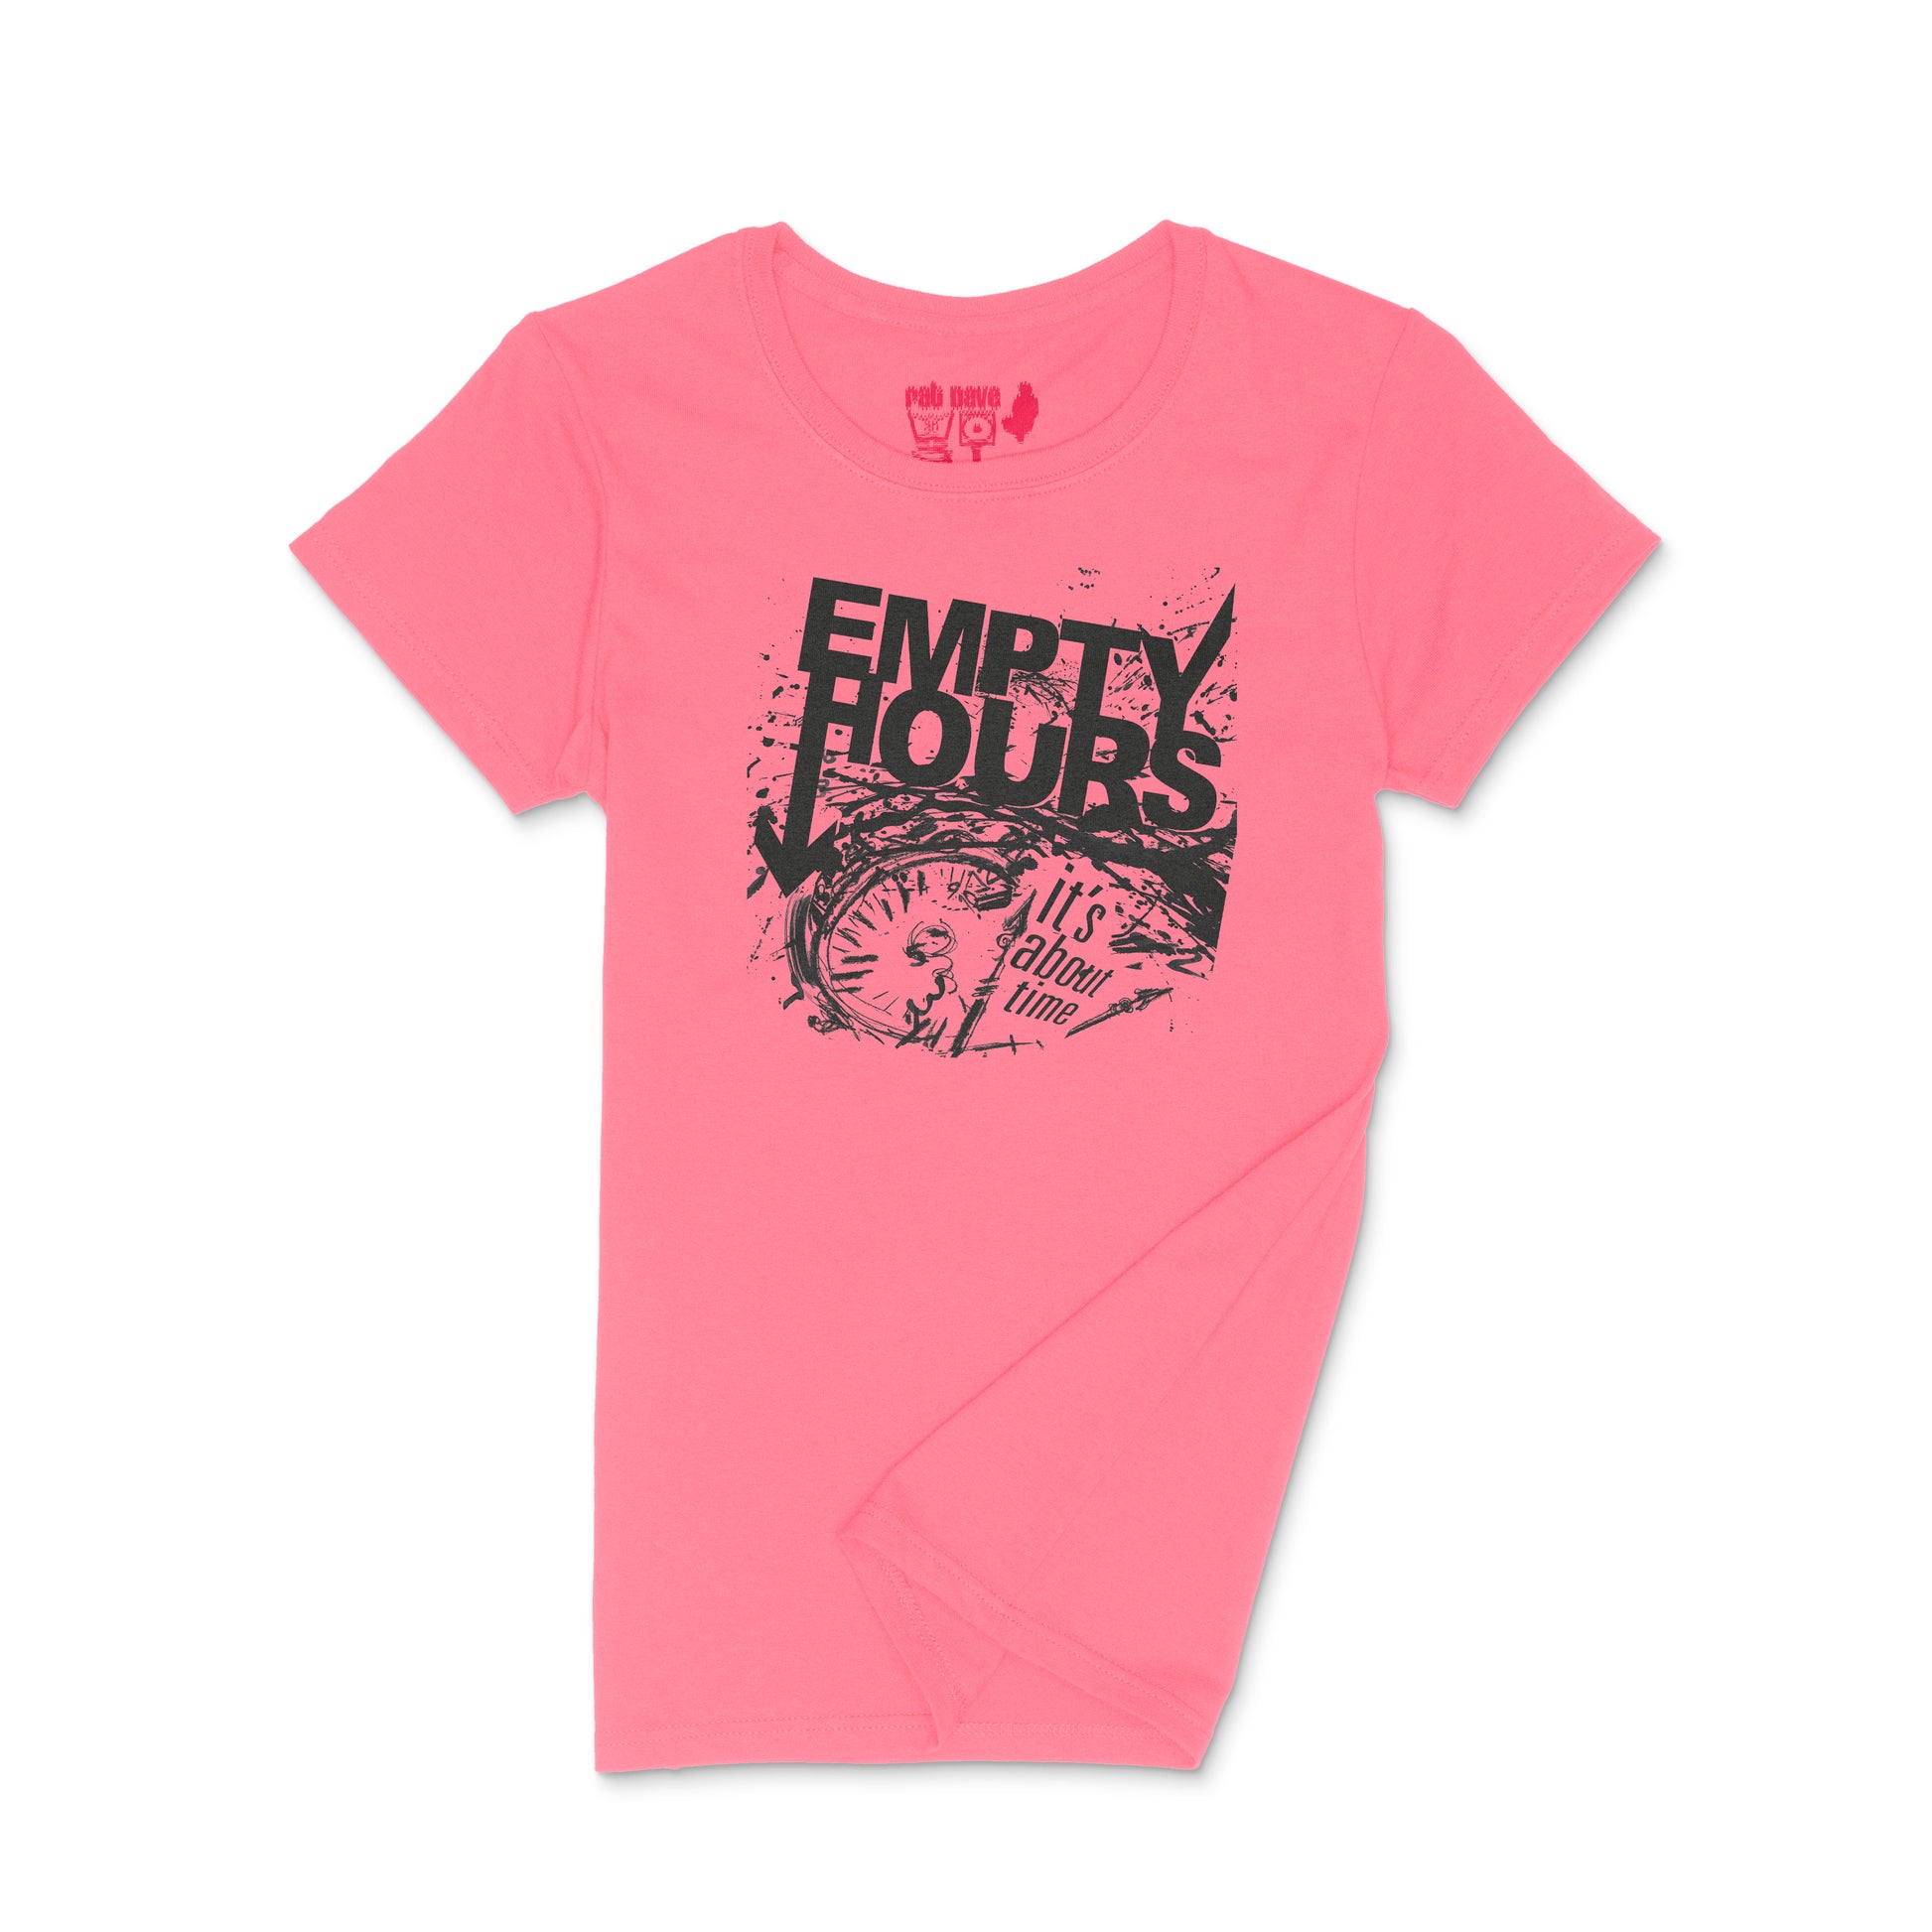 Brantford, Empty Hours, Fat Dave, It's About Time album cover, Ladies Crew Neck Shirt, Musician, Coral Silk/Black